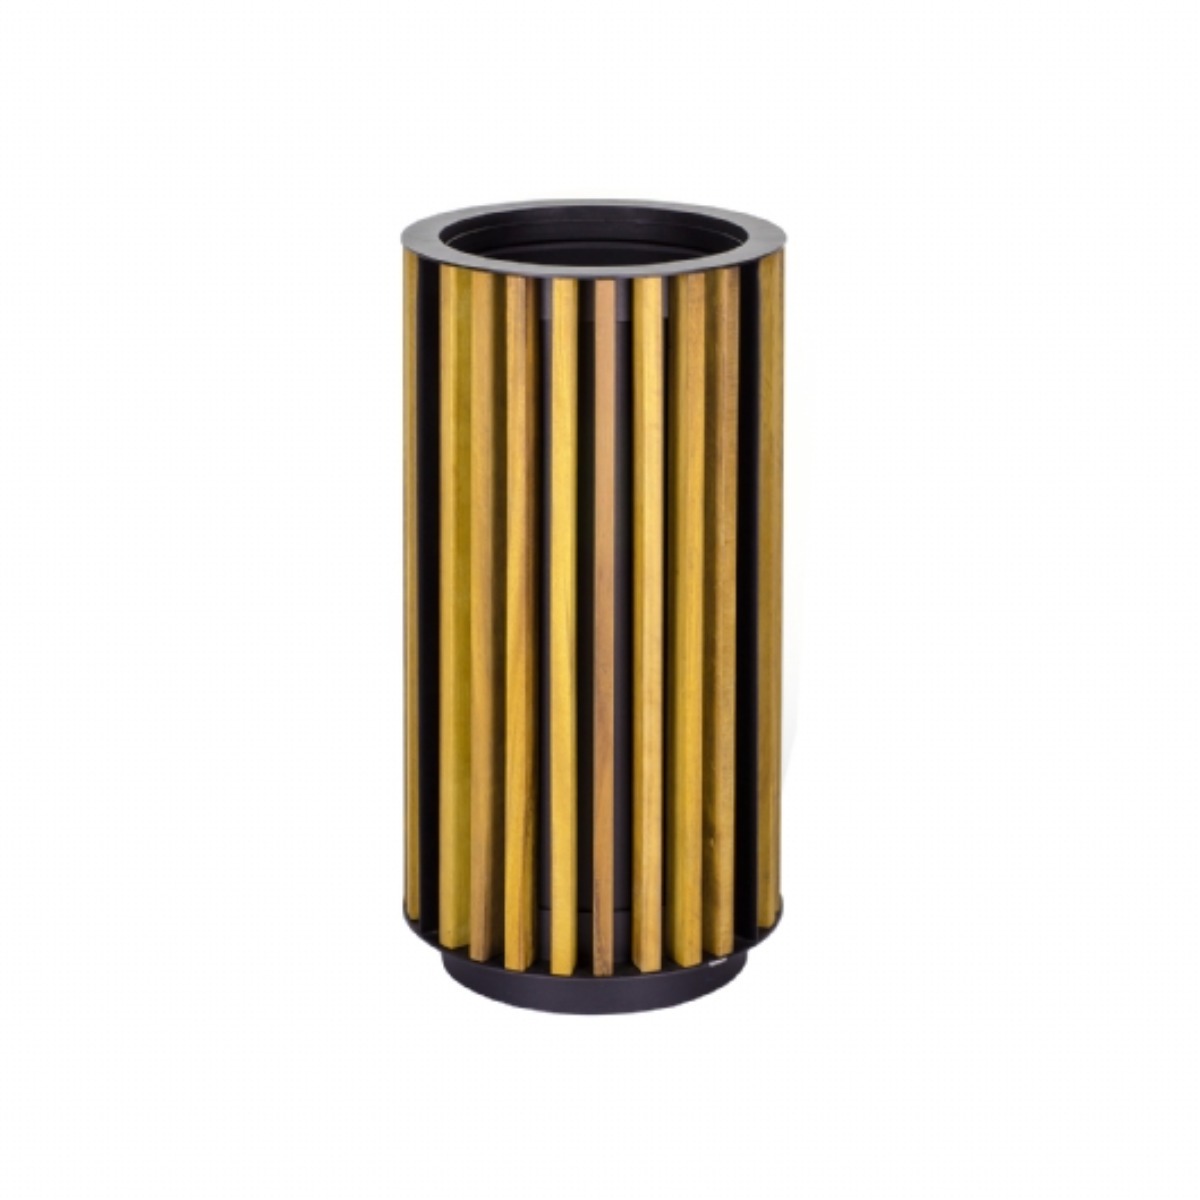 AB-512 Wood Open Space Trash Can